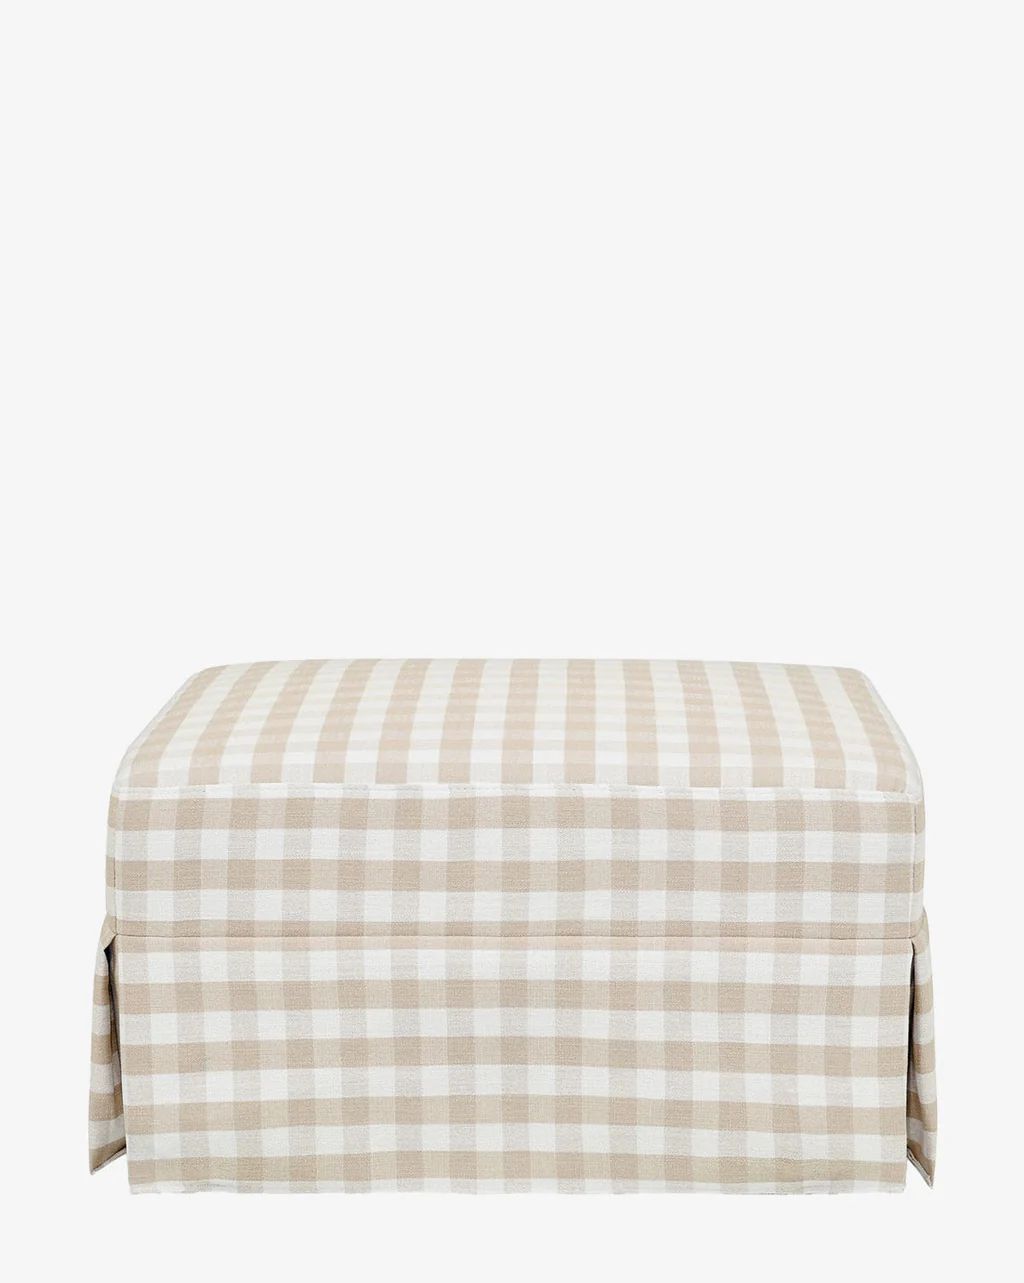 Crawford Gliding Ottoman in Gingham | McGee & Co.